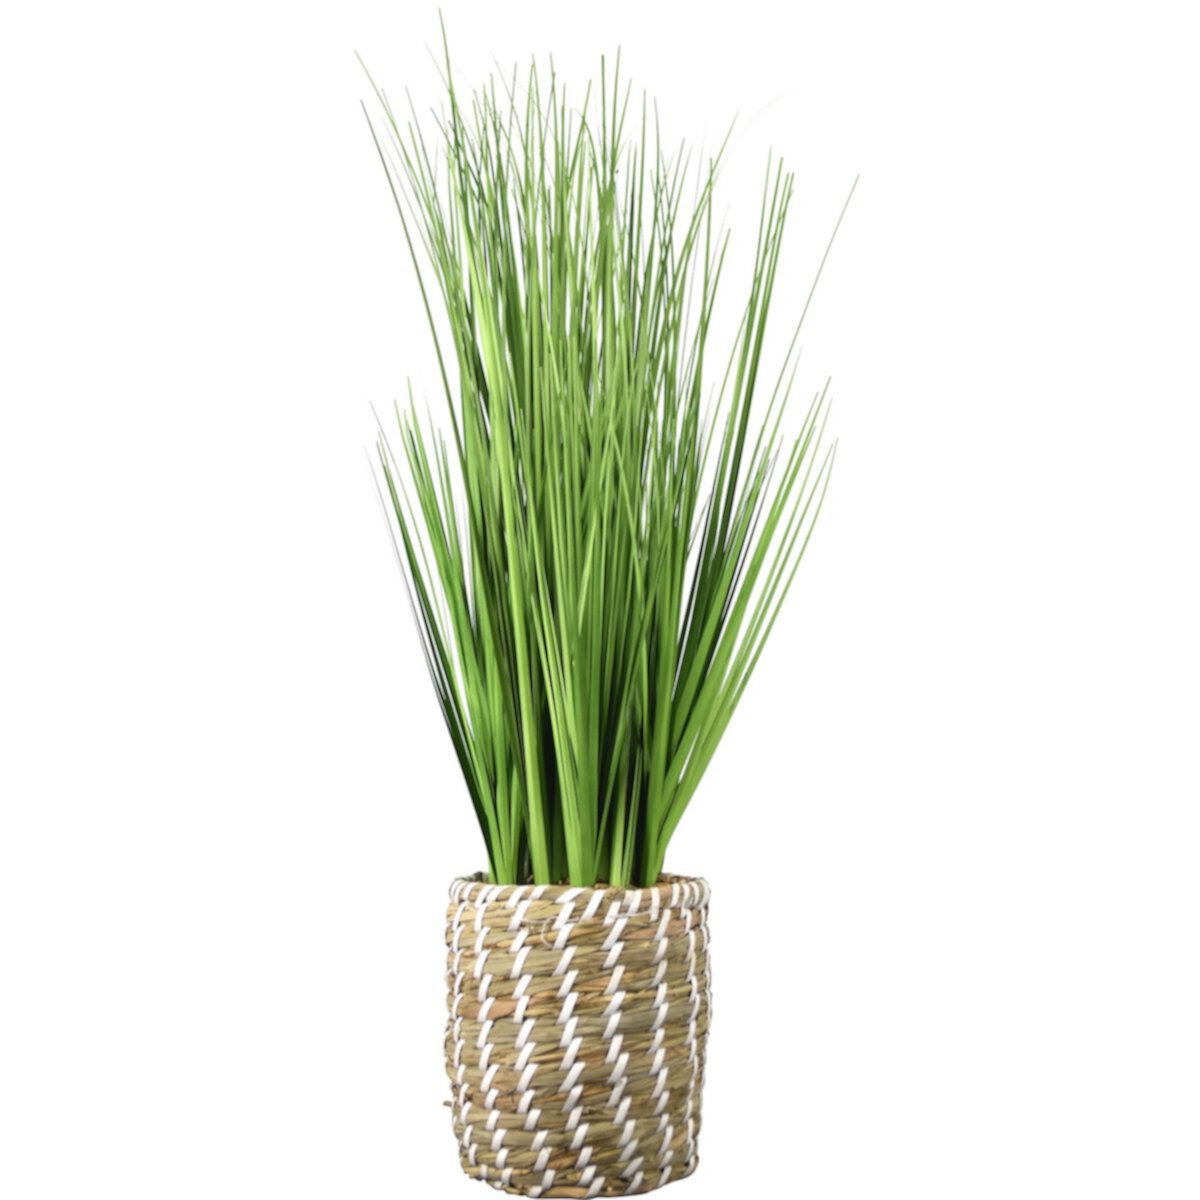 Artificial Grass Plant in Woven Pot Floor Decor Unbranded